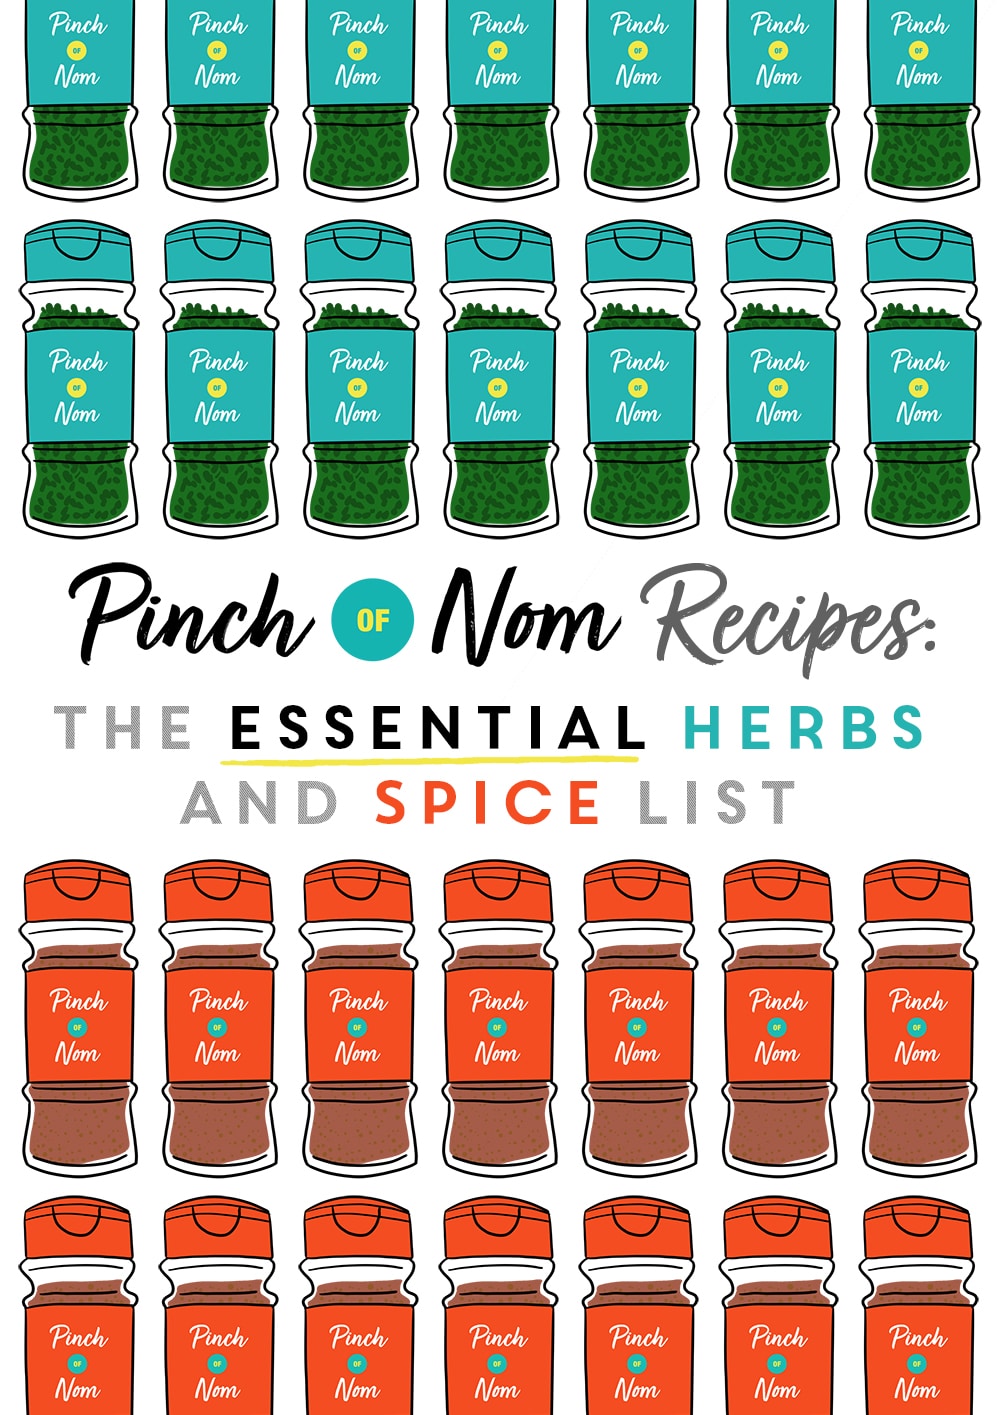 The Essential Herbs and Spice List - Pinch of Nom Slimming Recipes 